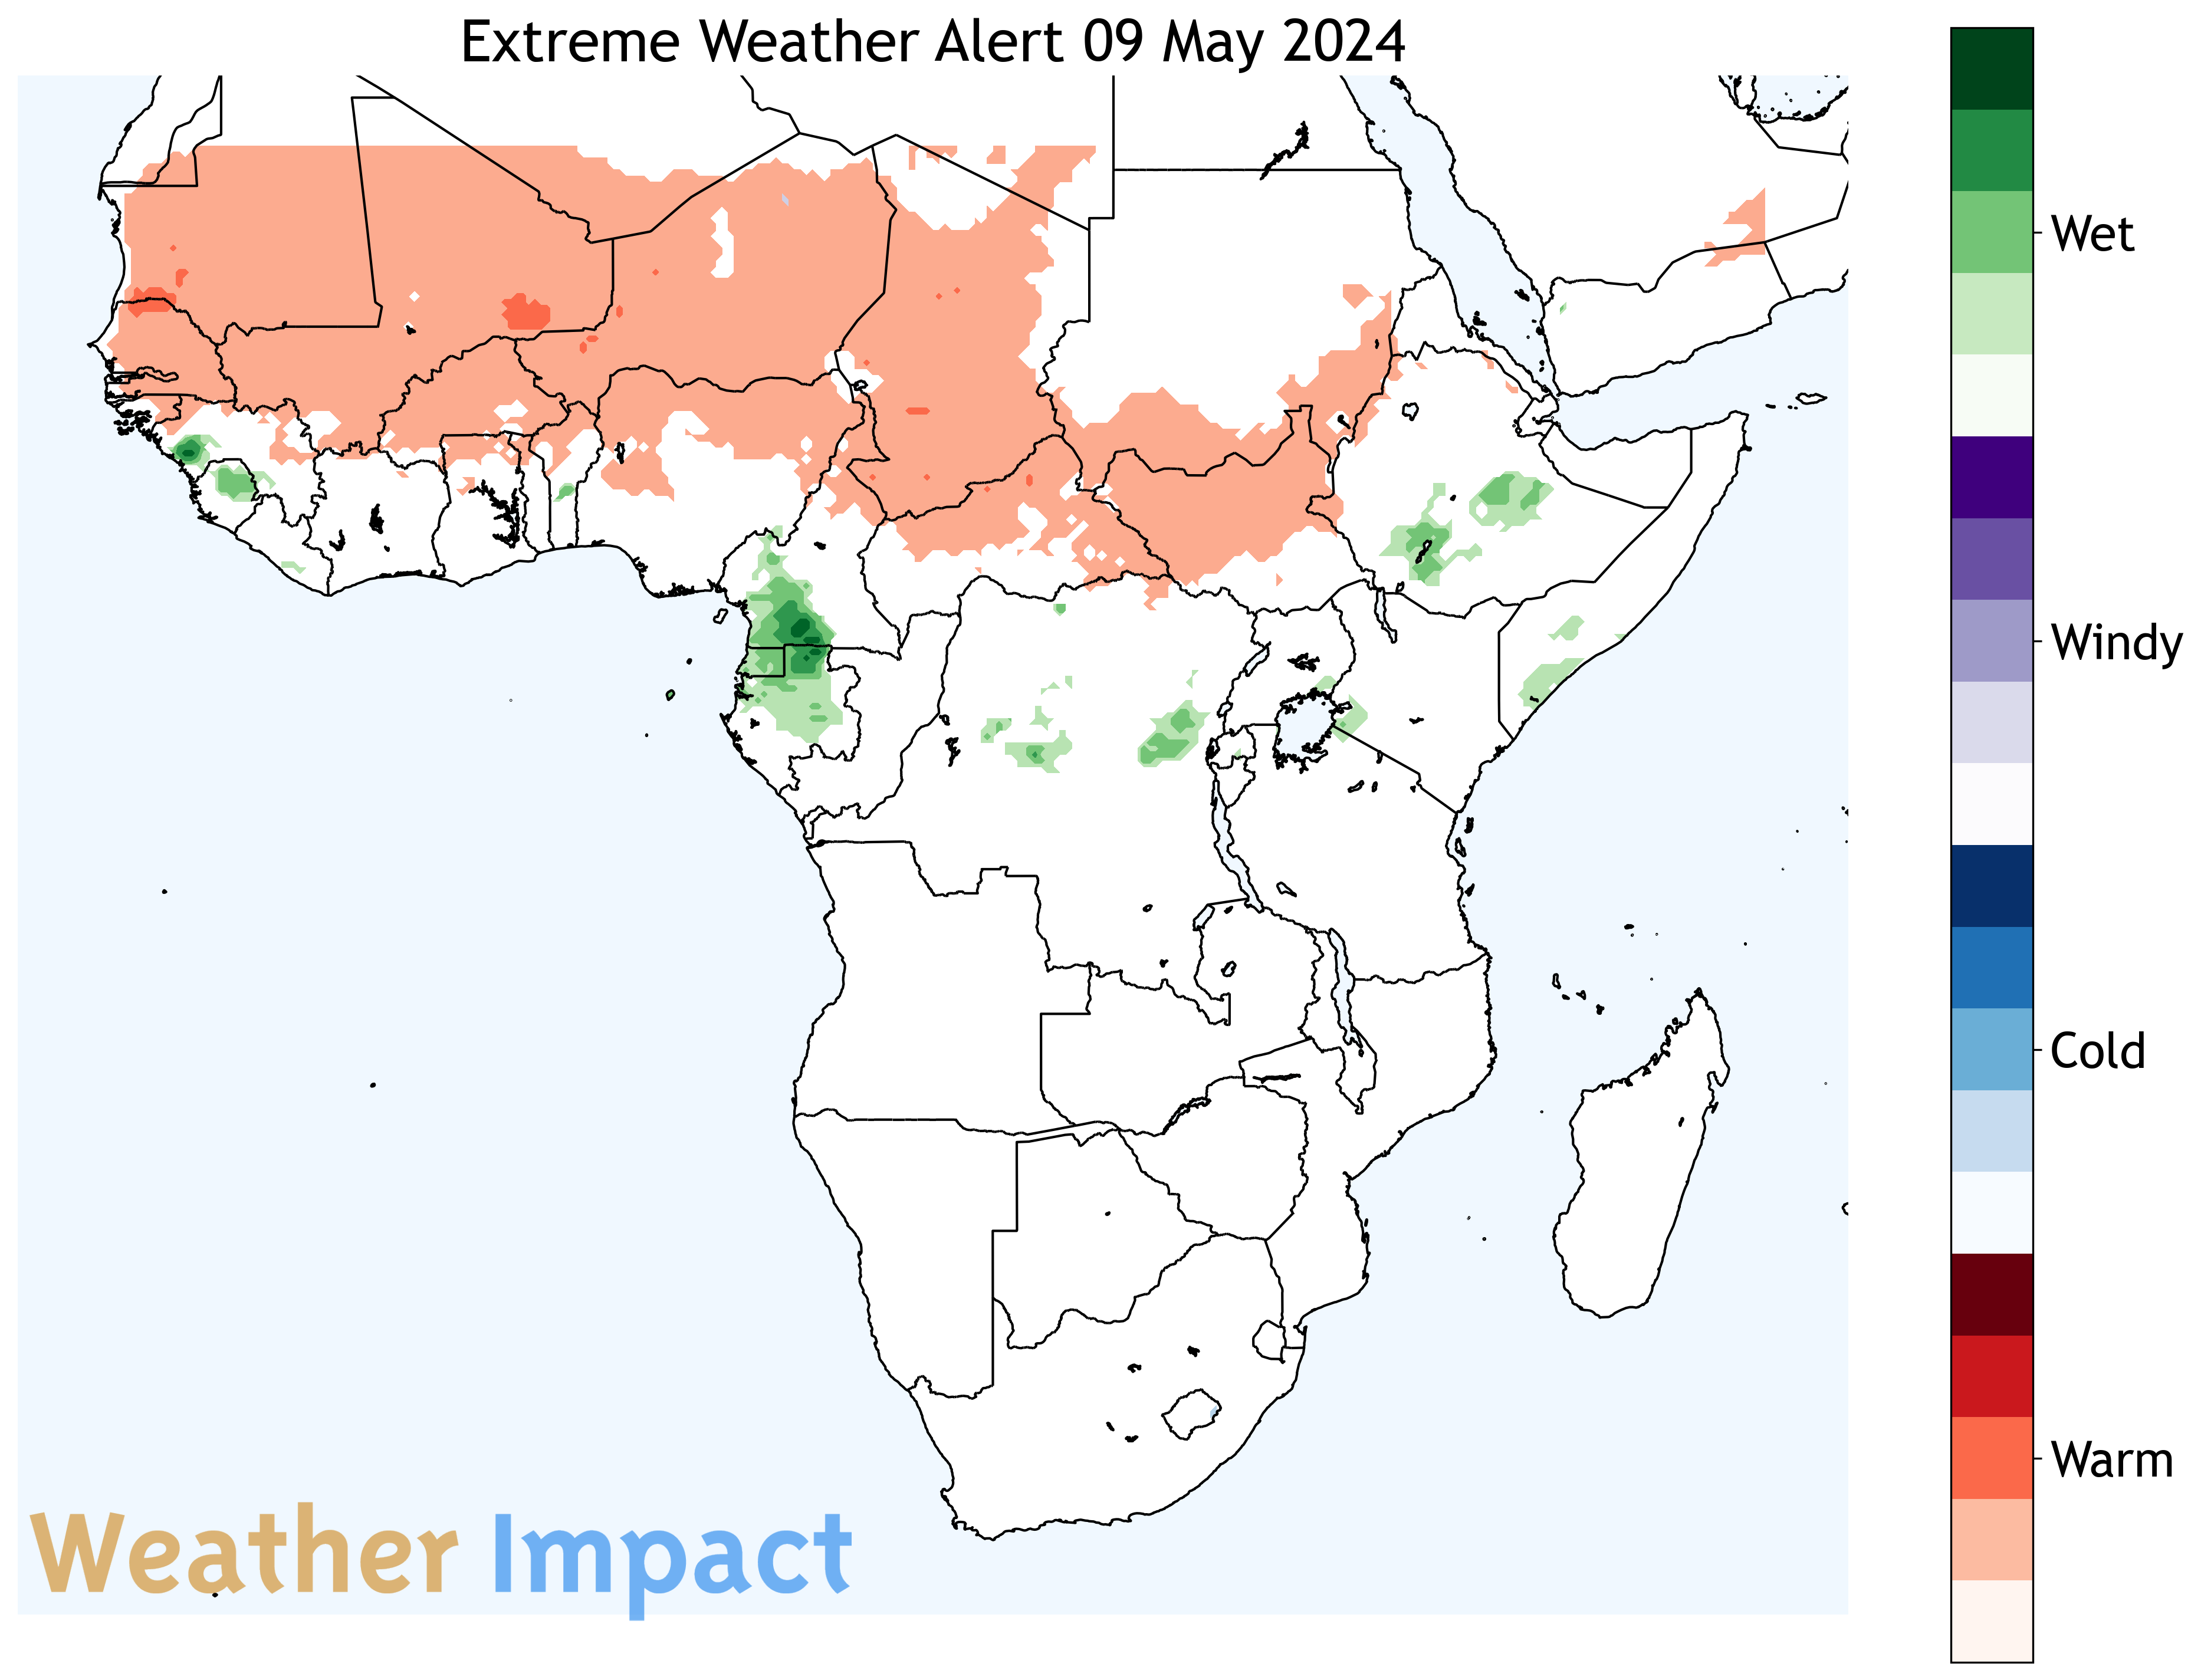 Daily updated extreme weather alert for Sub-Sahara Africa